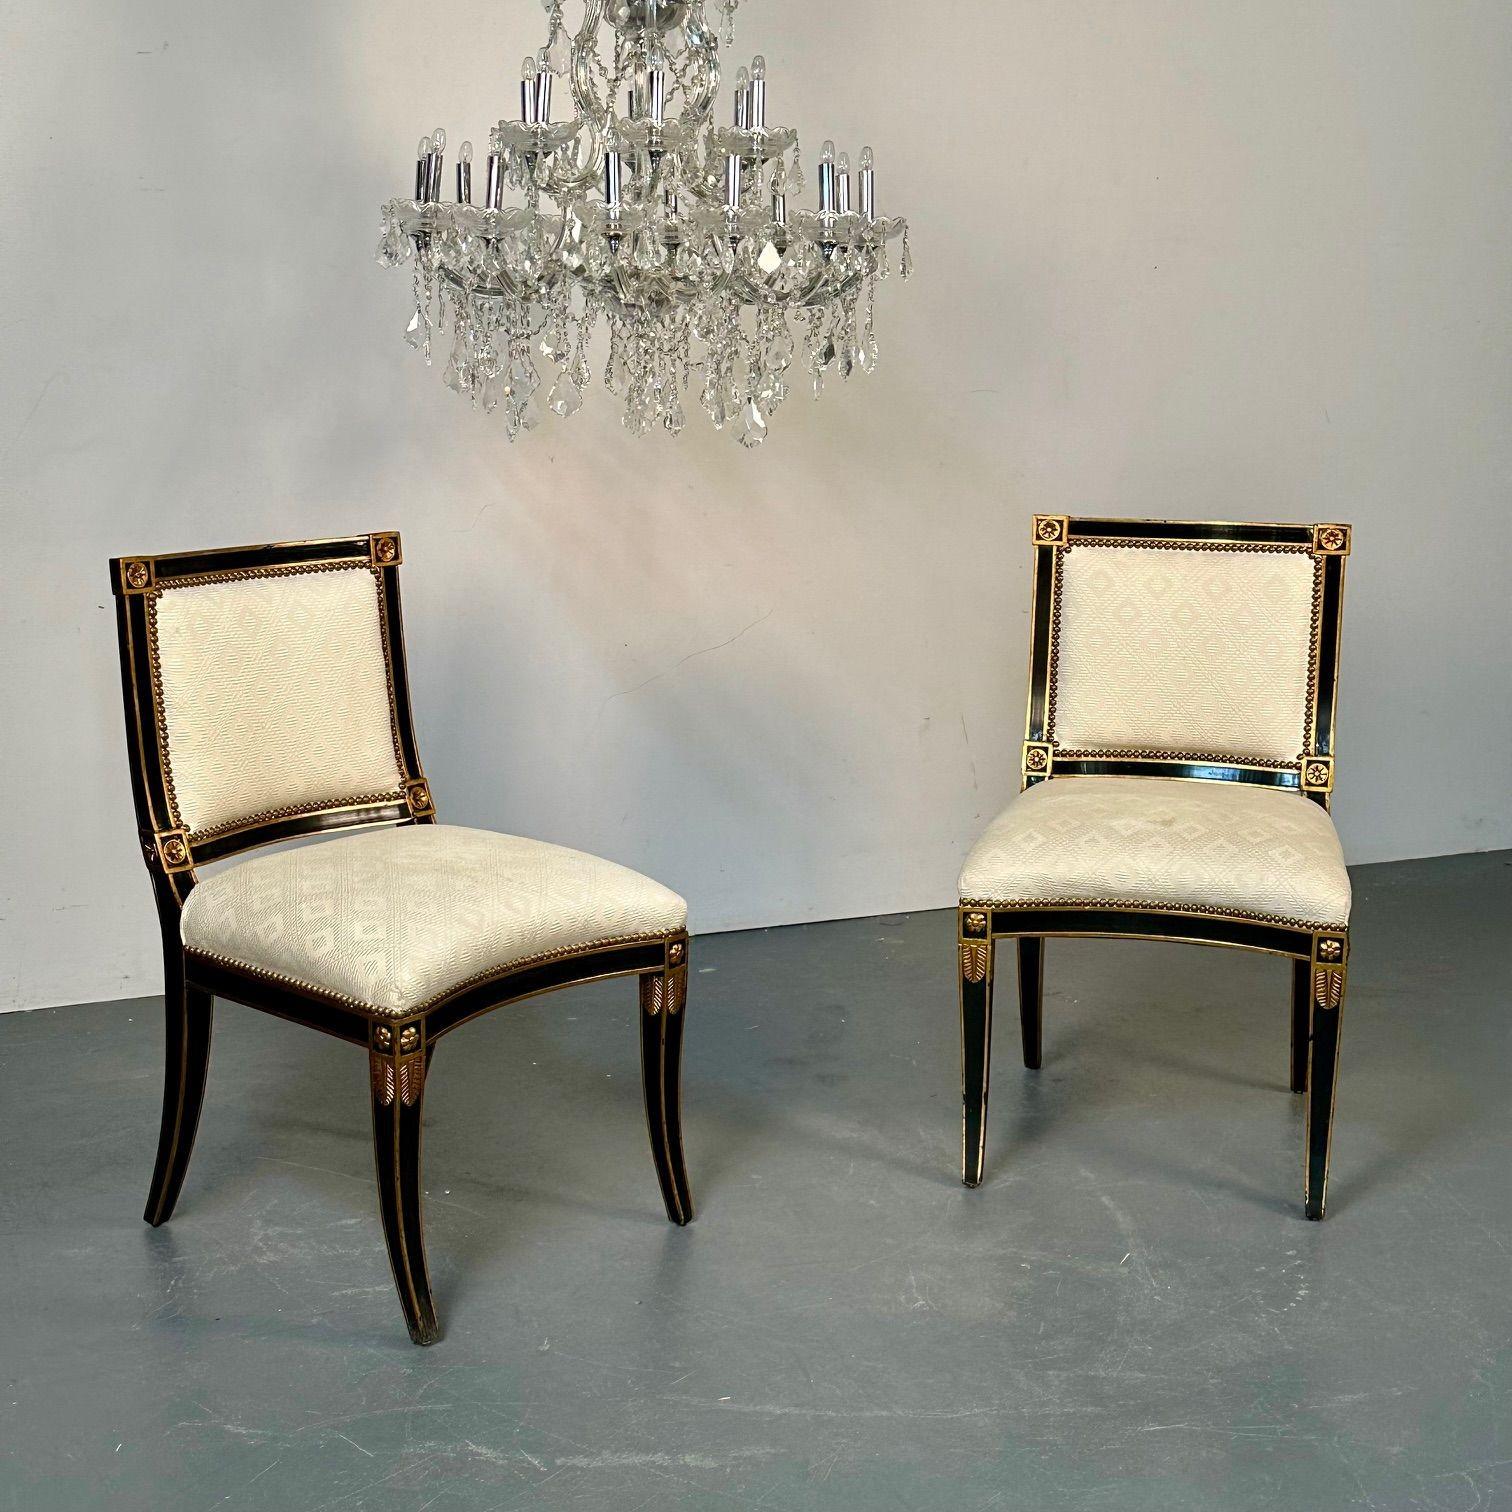 Hollywood Regency Pair of Louis XVI Maison Jansen Style Dining / Side Chairs, Ebony and Giltwood For Sale